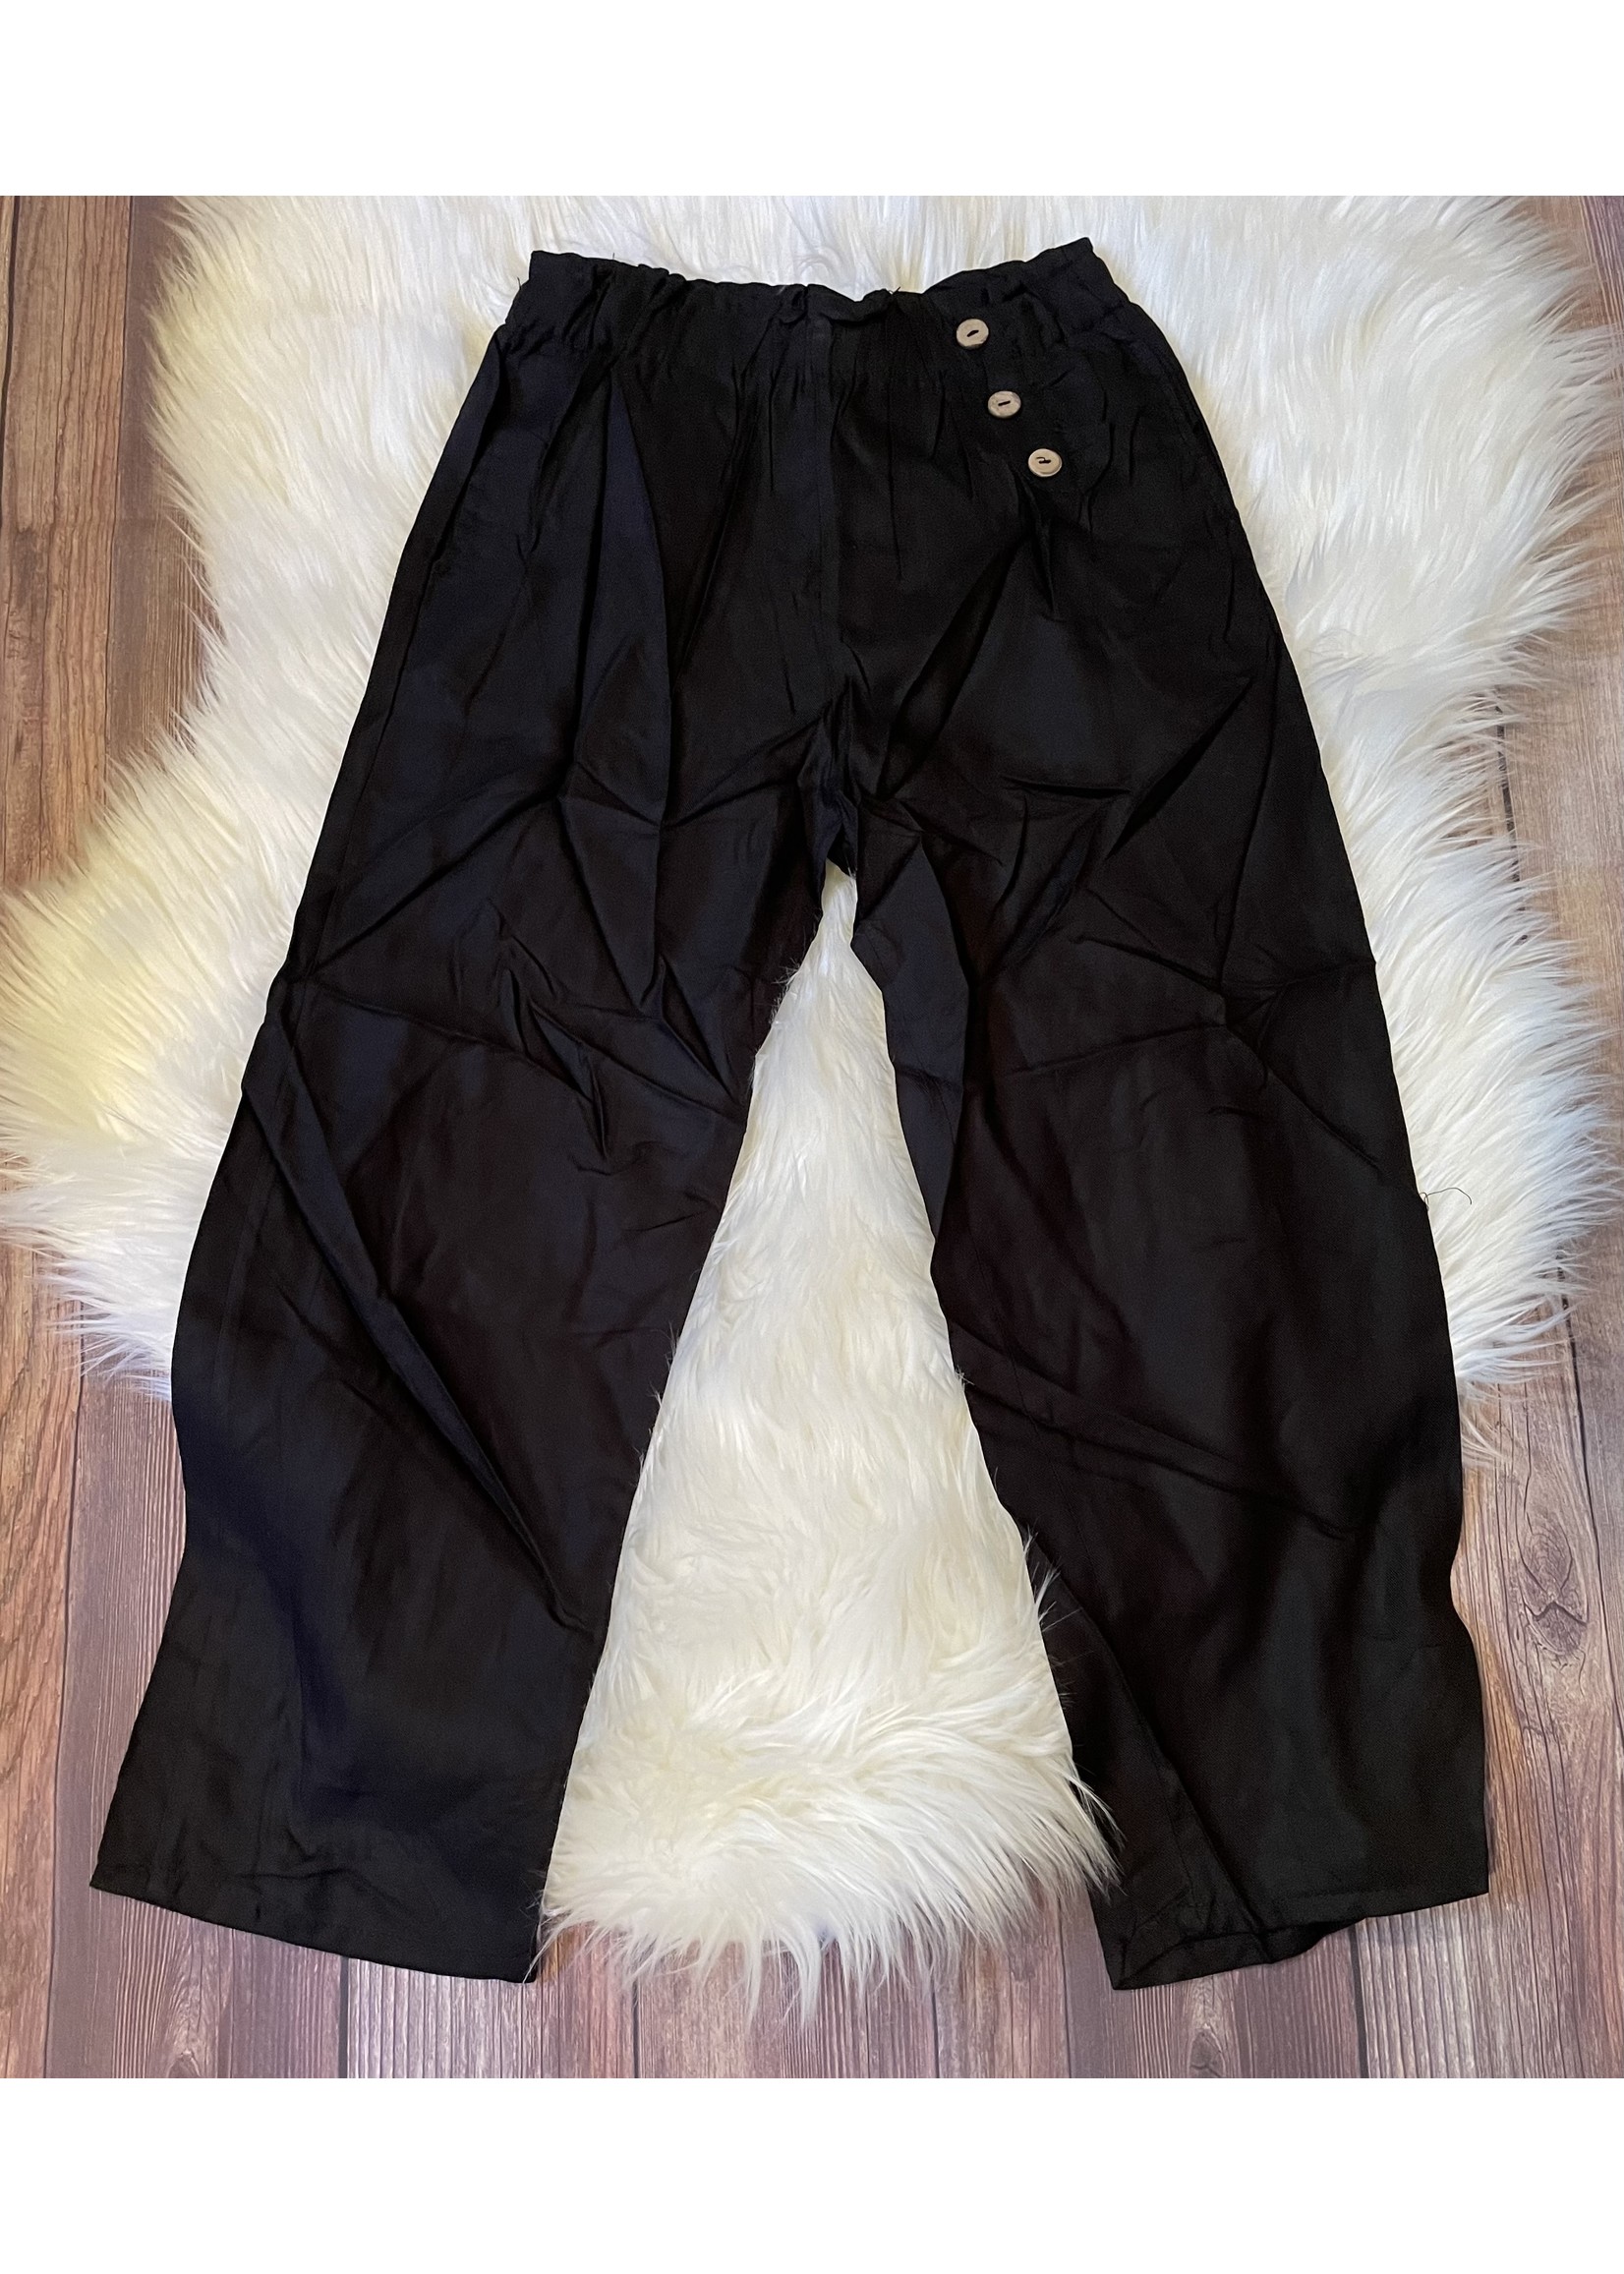 Girls Black Twill Pants with Side Buttons